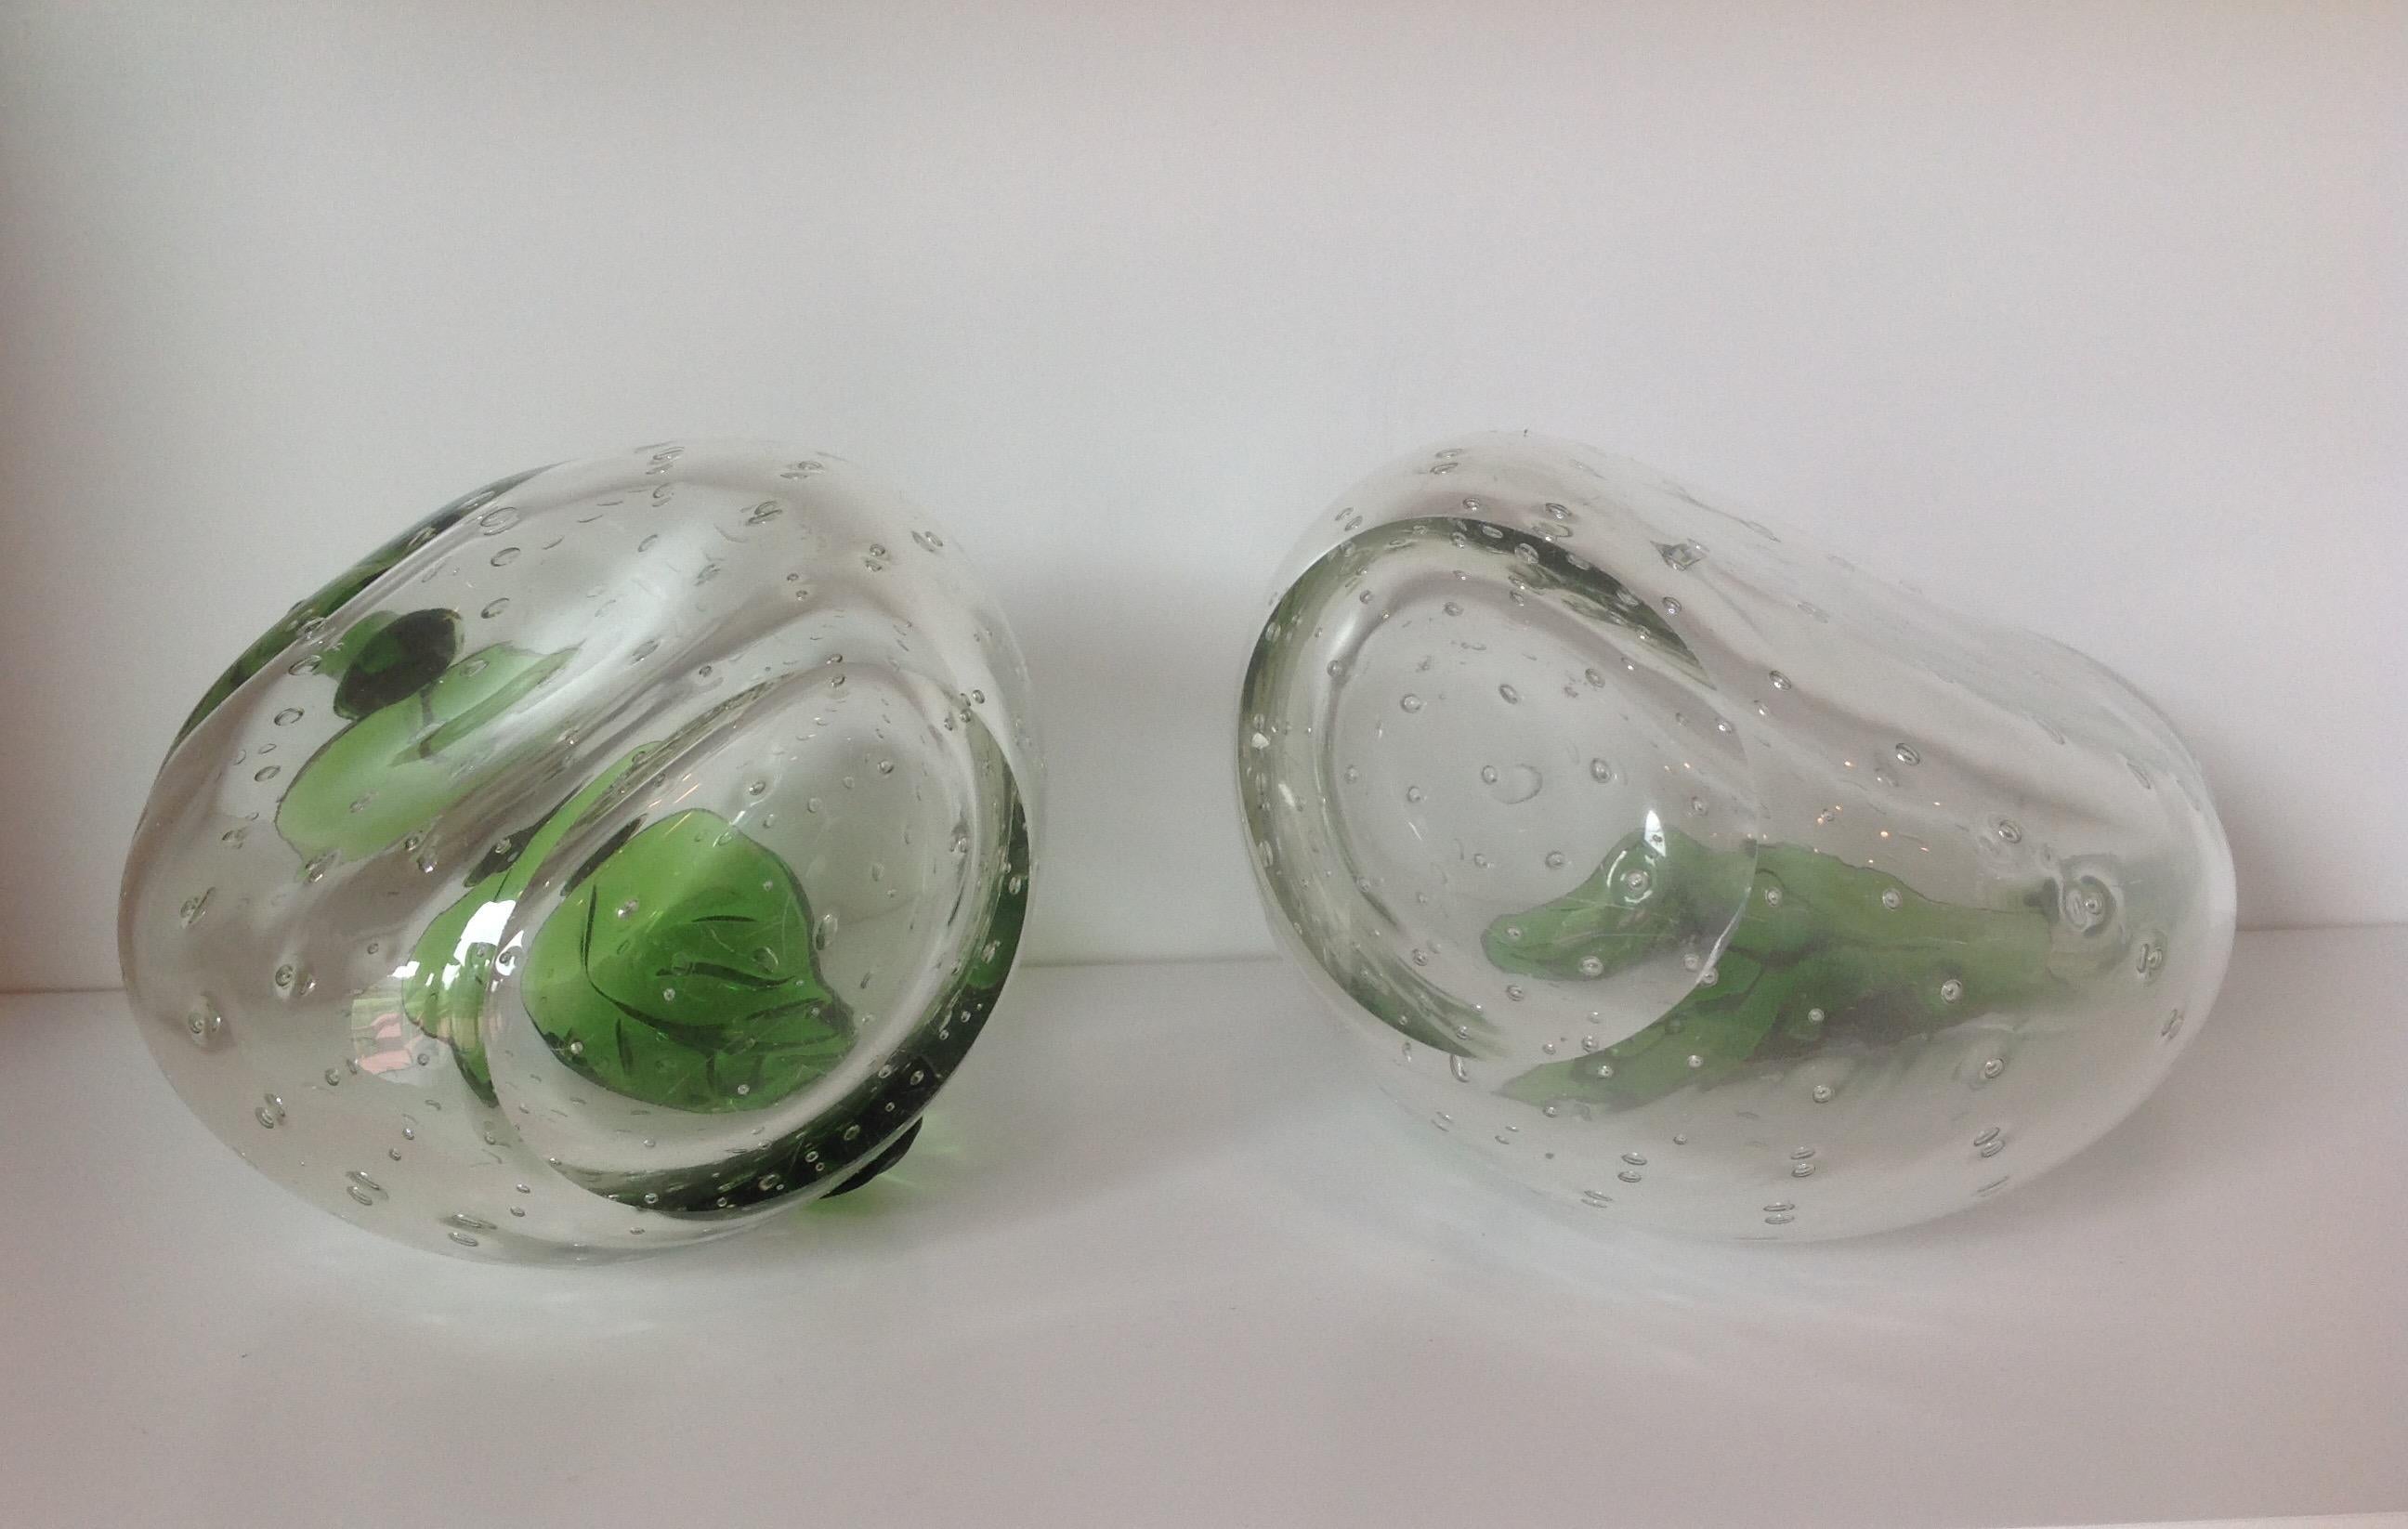 Large Murano Glass Apple and Pear Bookends with Controlled Bubbles In Good Condition For Sale In Keego Harbor, MI